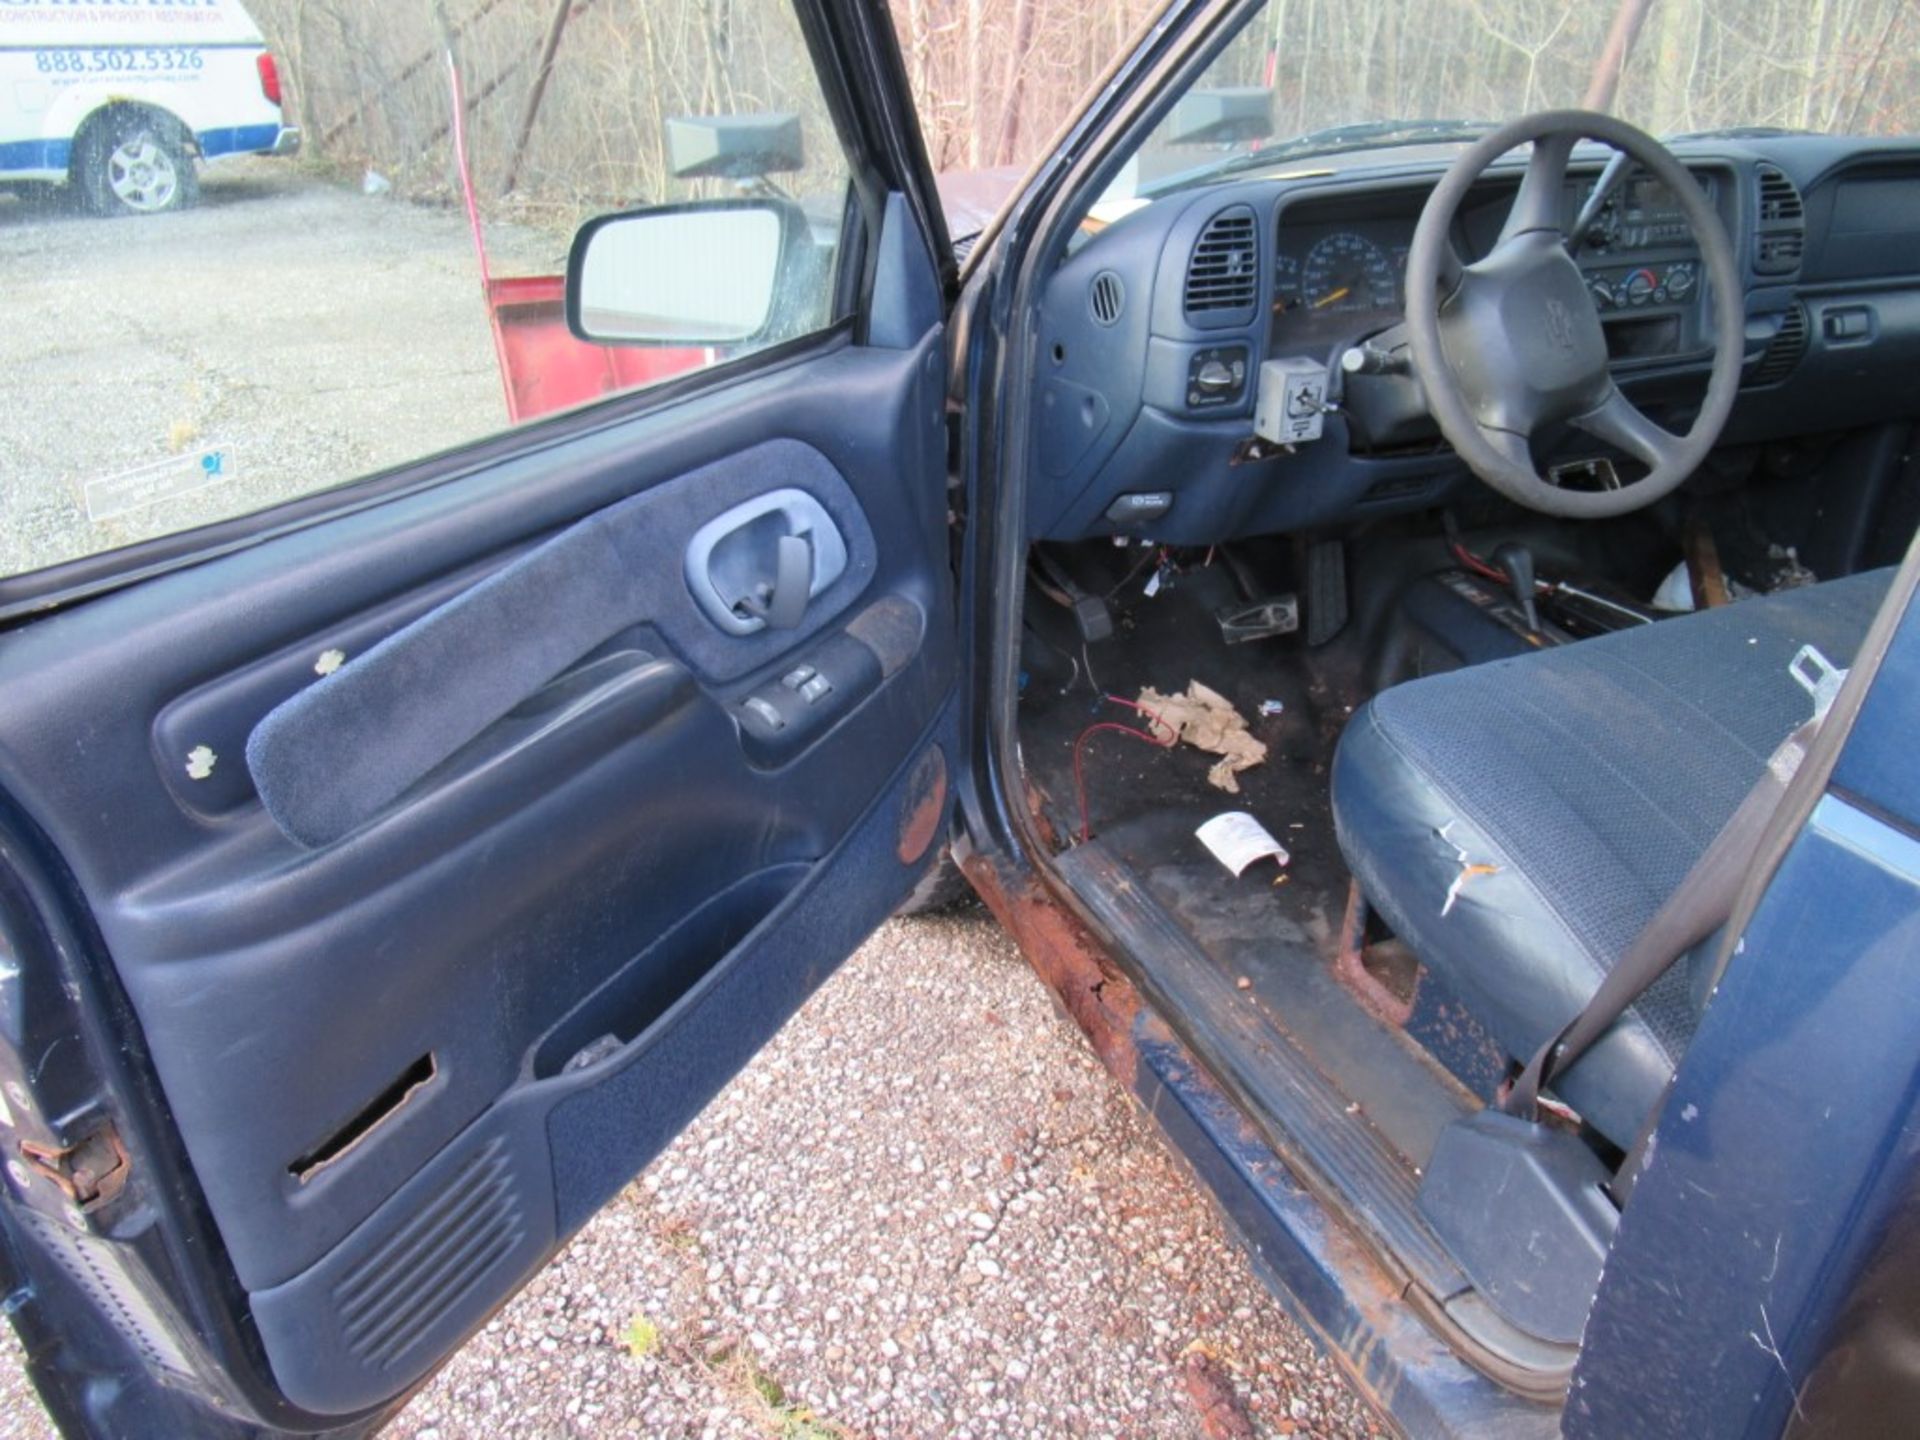 1998 Chevrolet 1500 Snow Plow Truck, VIN 1GCEK14W8WZ202027, Automatic, 4 WD, 77,745 Miles, Would NOT - Image 14 of 22